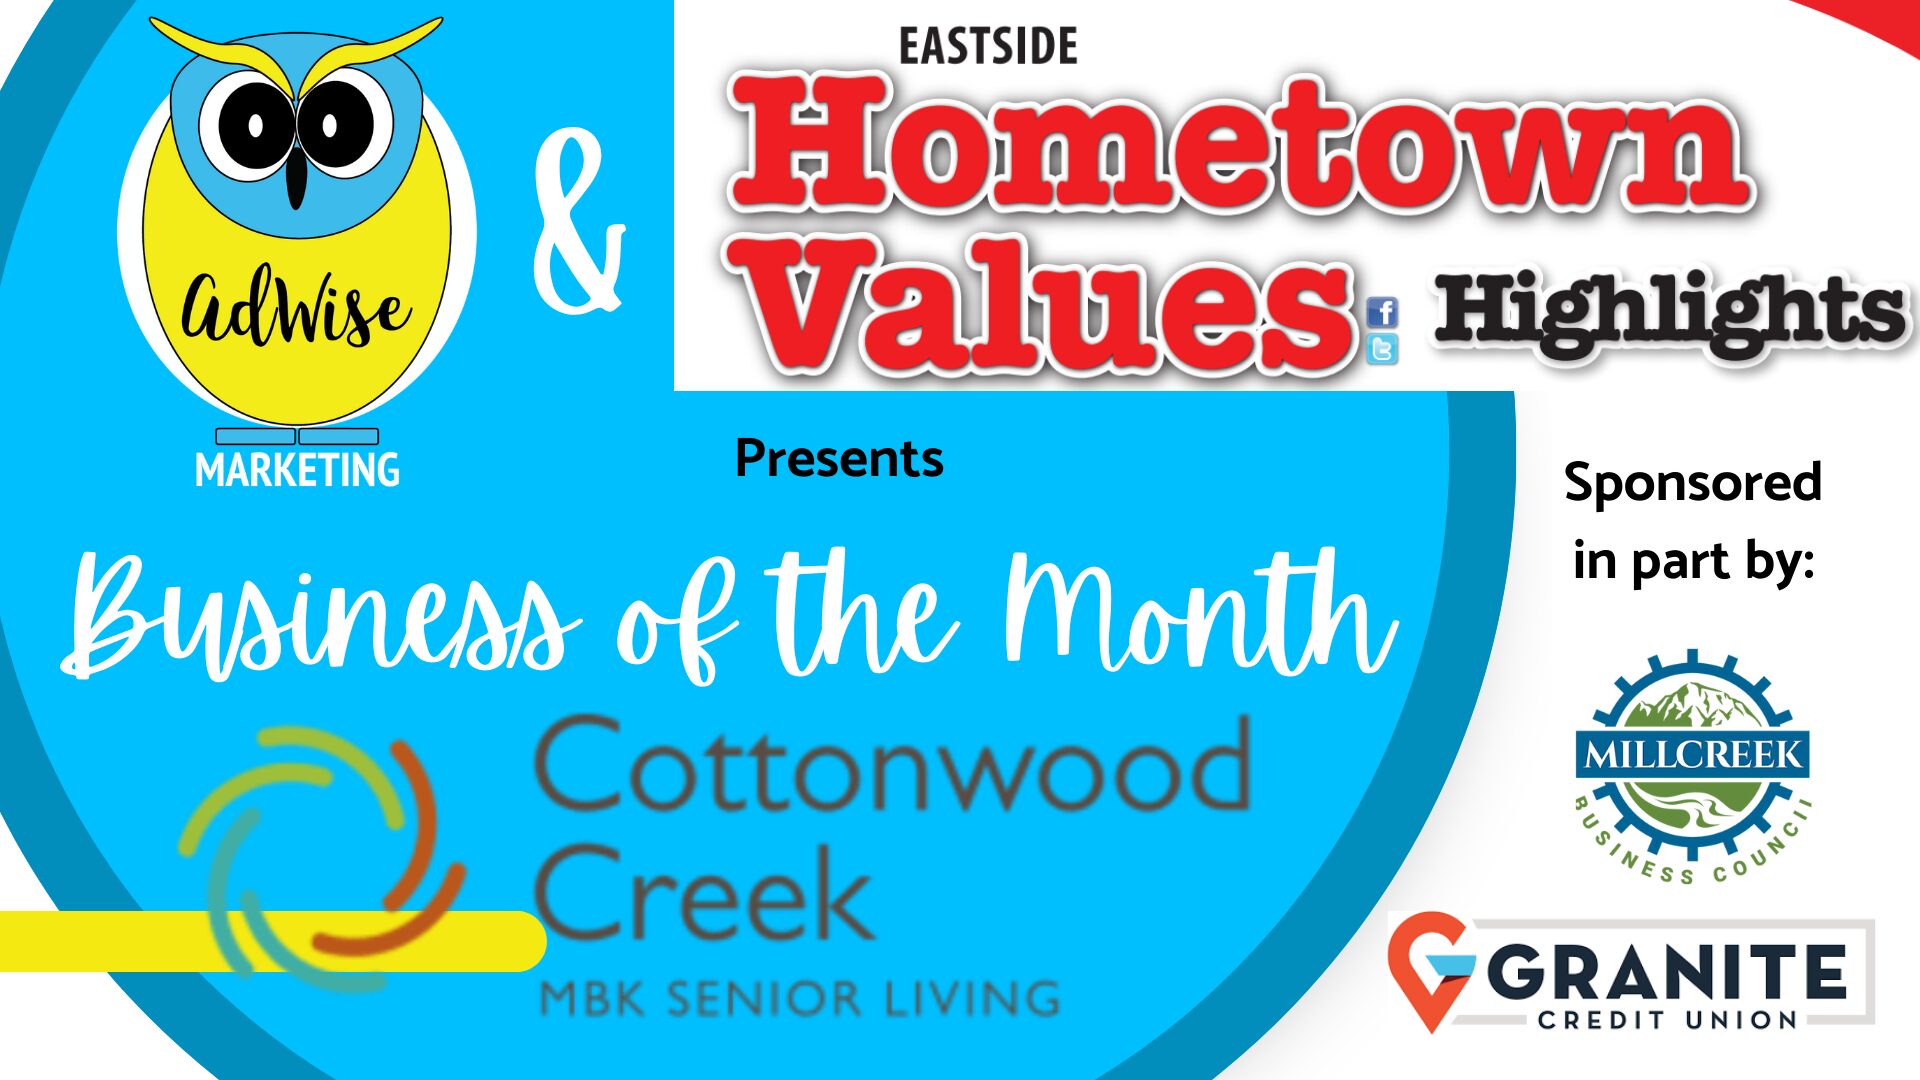 business of the month brought to you by Adwise Marketing and Hometown Values Eastside Edition and sponsored by Granite Credit Union and Millcreek Business Council. this month's featured business is Cottonwood Creek Senior Living (logos included on image)